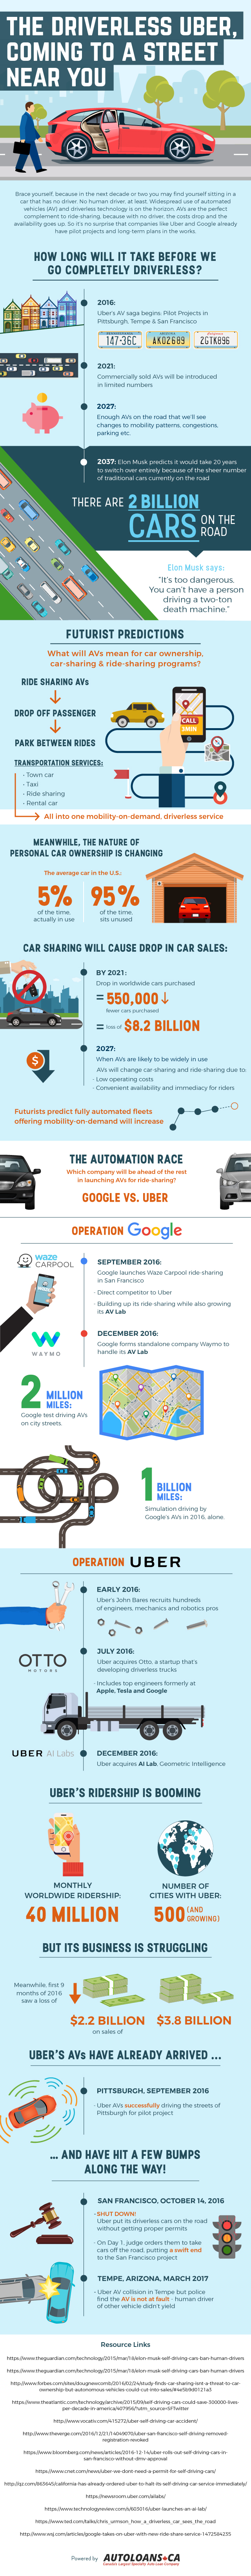 Automated cars and Uber (1)